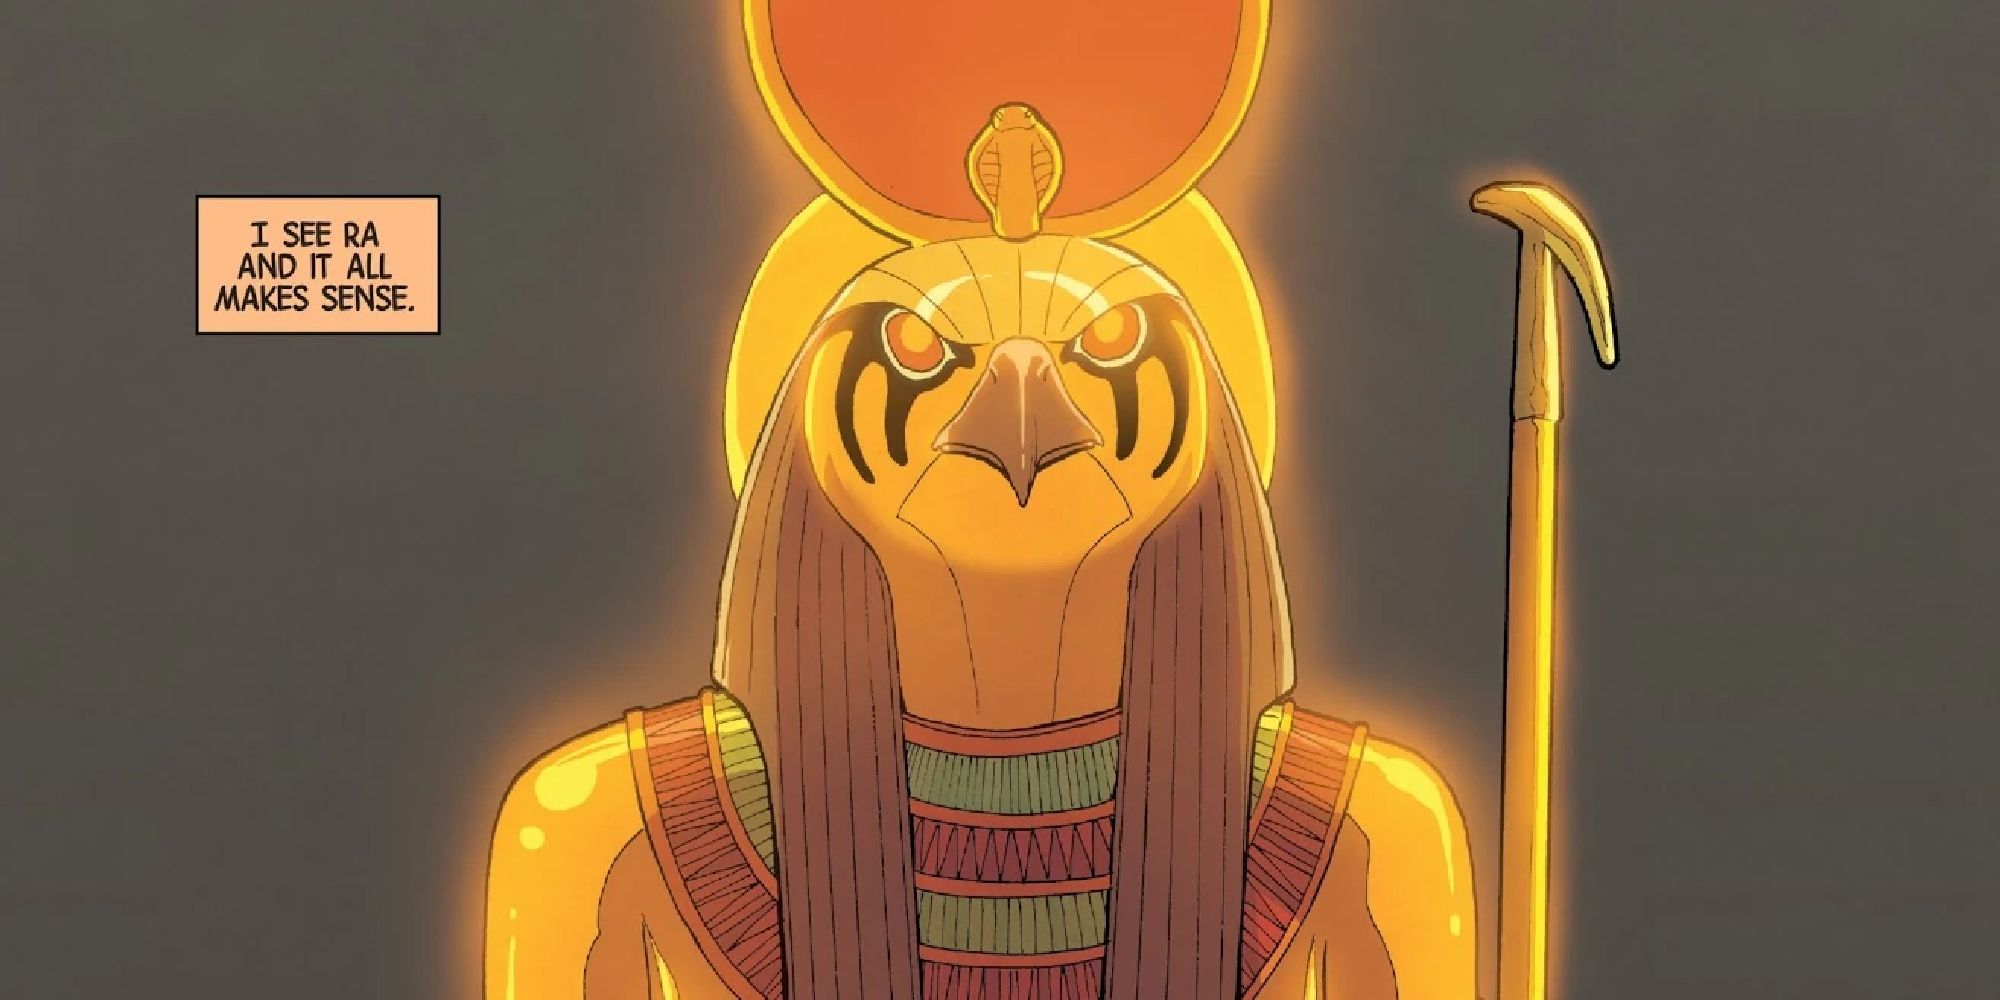 A close-up of a glowing statue of the Amon Ra in Marvel Comics